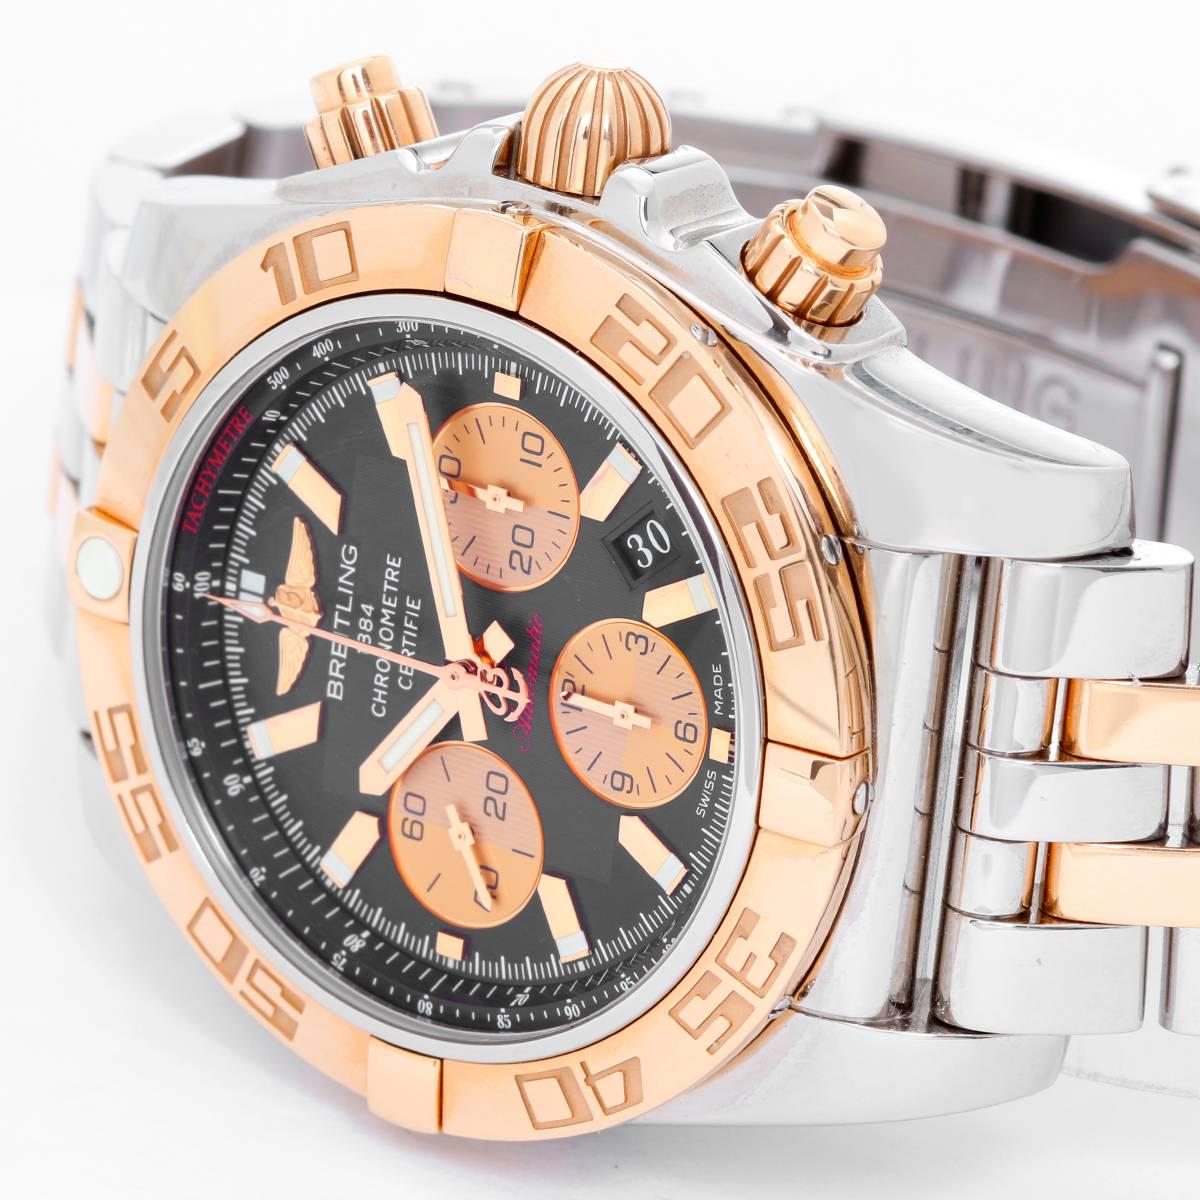 Breitling Chronomat 44 Rose Gold and Stainless steel CB0110 -  Automatic. Stainless Steel and Rose Gold Case ( 44 mm ). Black dial with stick hour markers; Champagne sub dials. Breitling Stainless Steel and Rose Gold bracelet. Pre-owned with box and